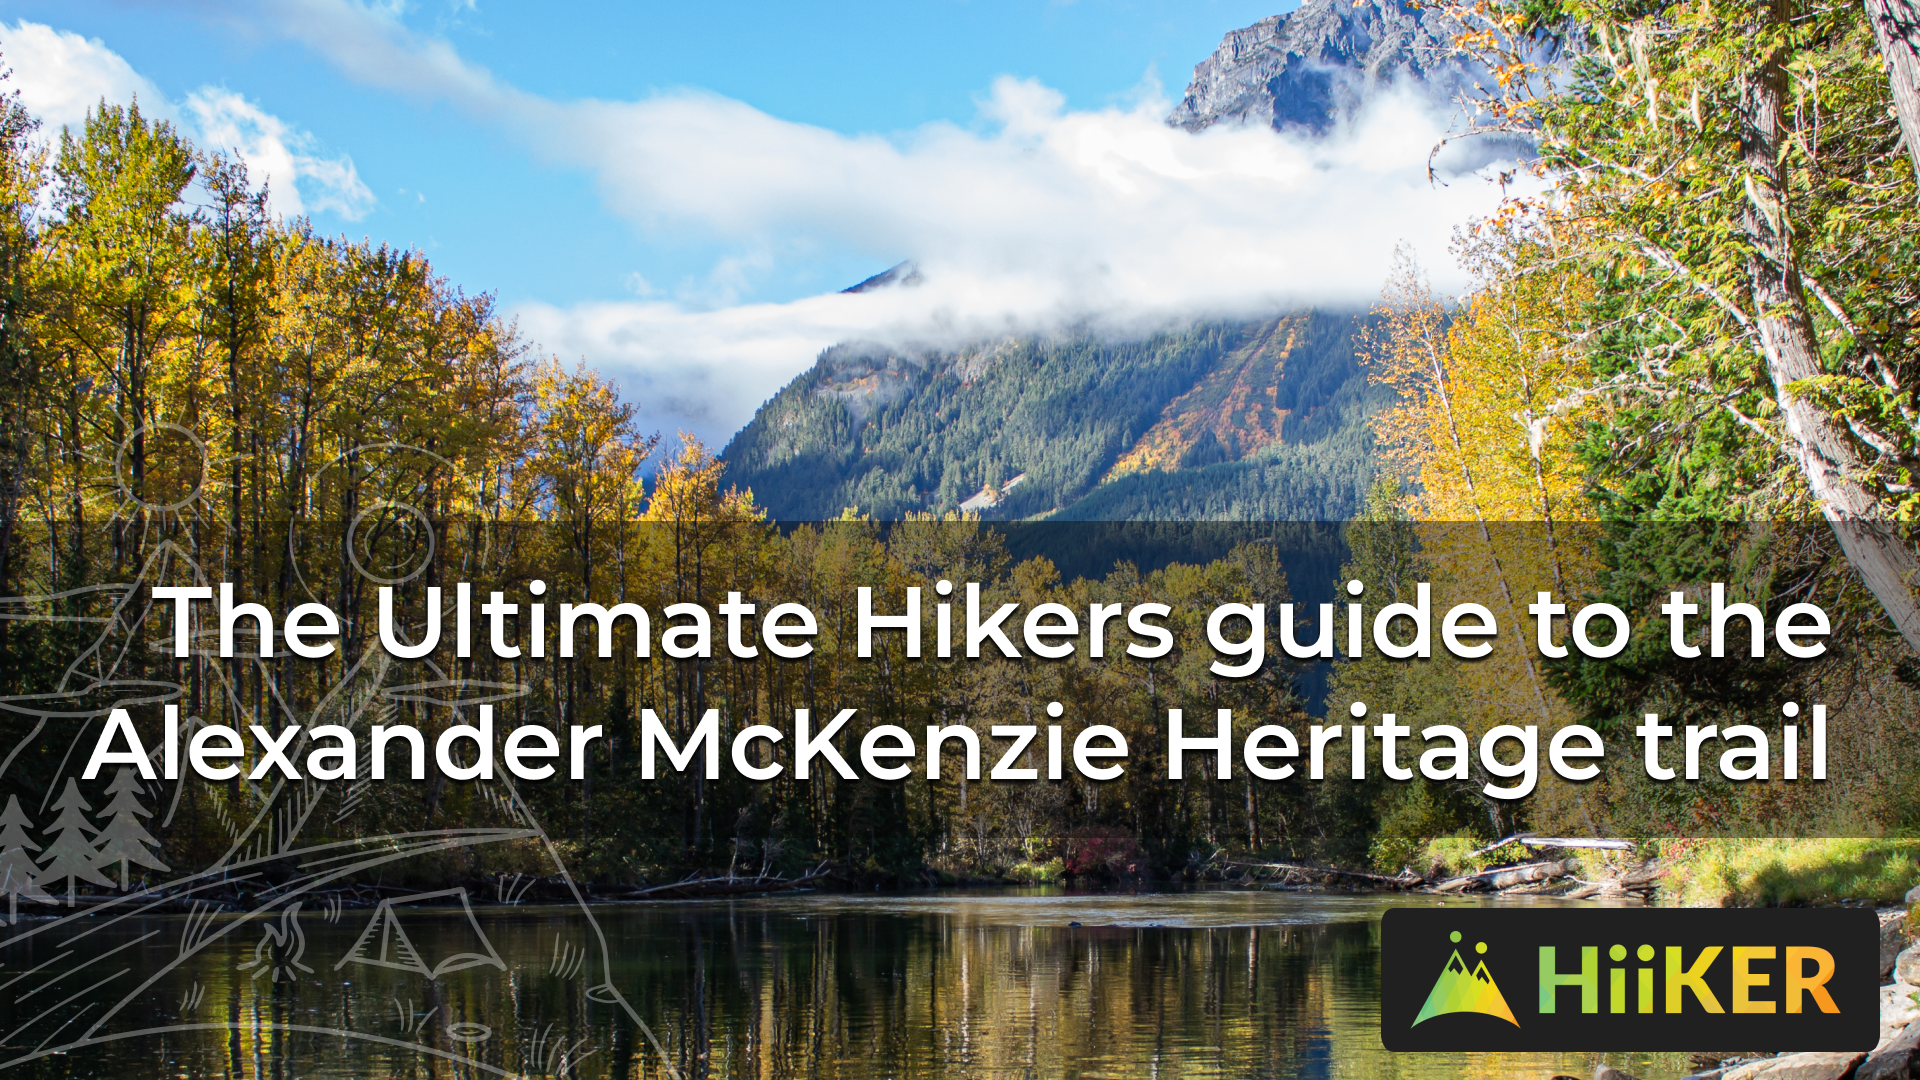 The Ultimate Hiker’s guide to the Alexander Mackenzie Heritage Trail picture